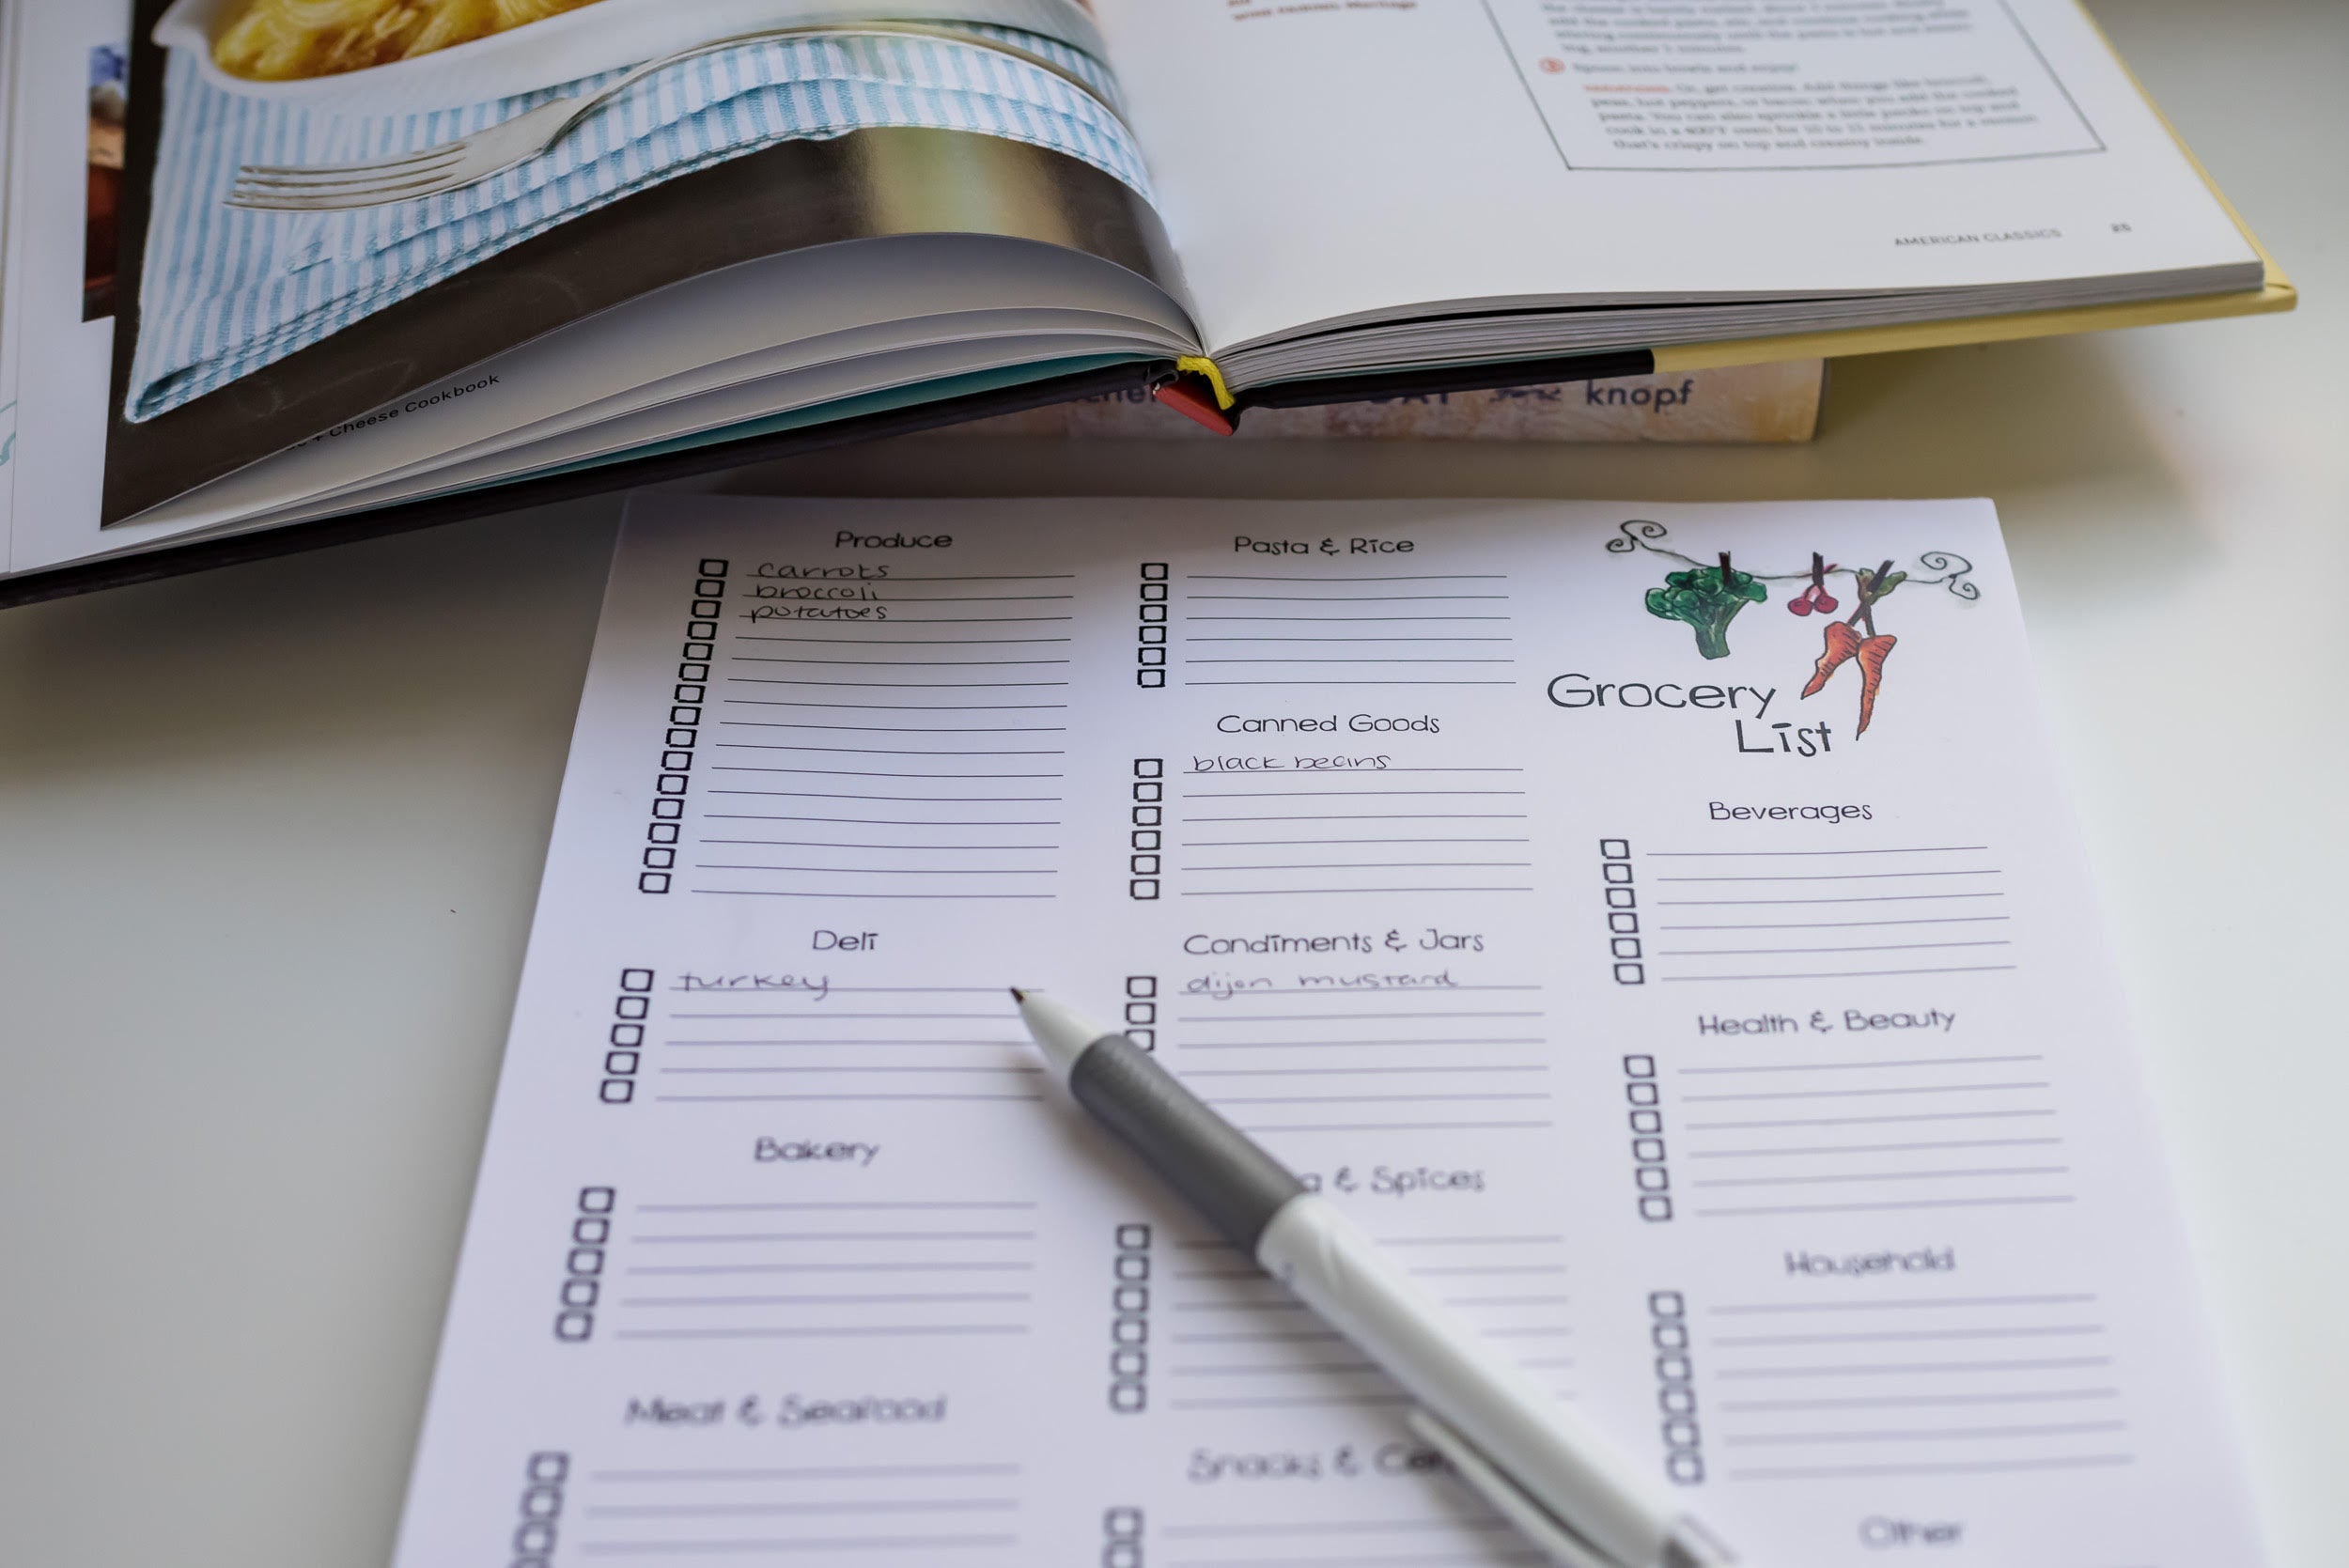 PRINTABLE Grocery List with Categories | PDF Digital Download